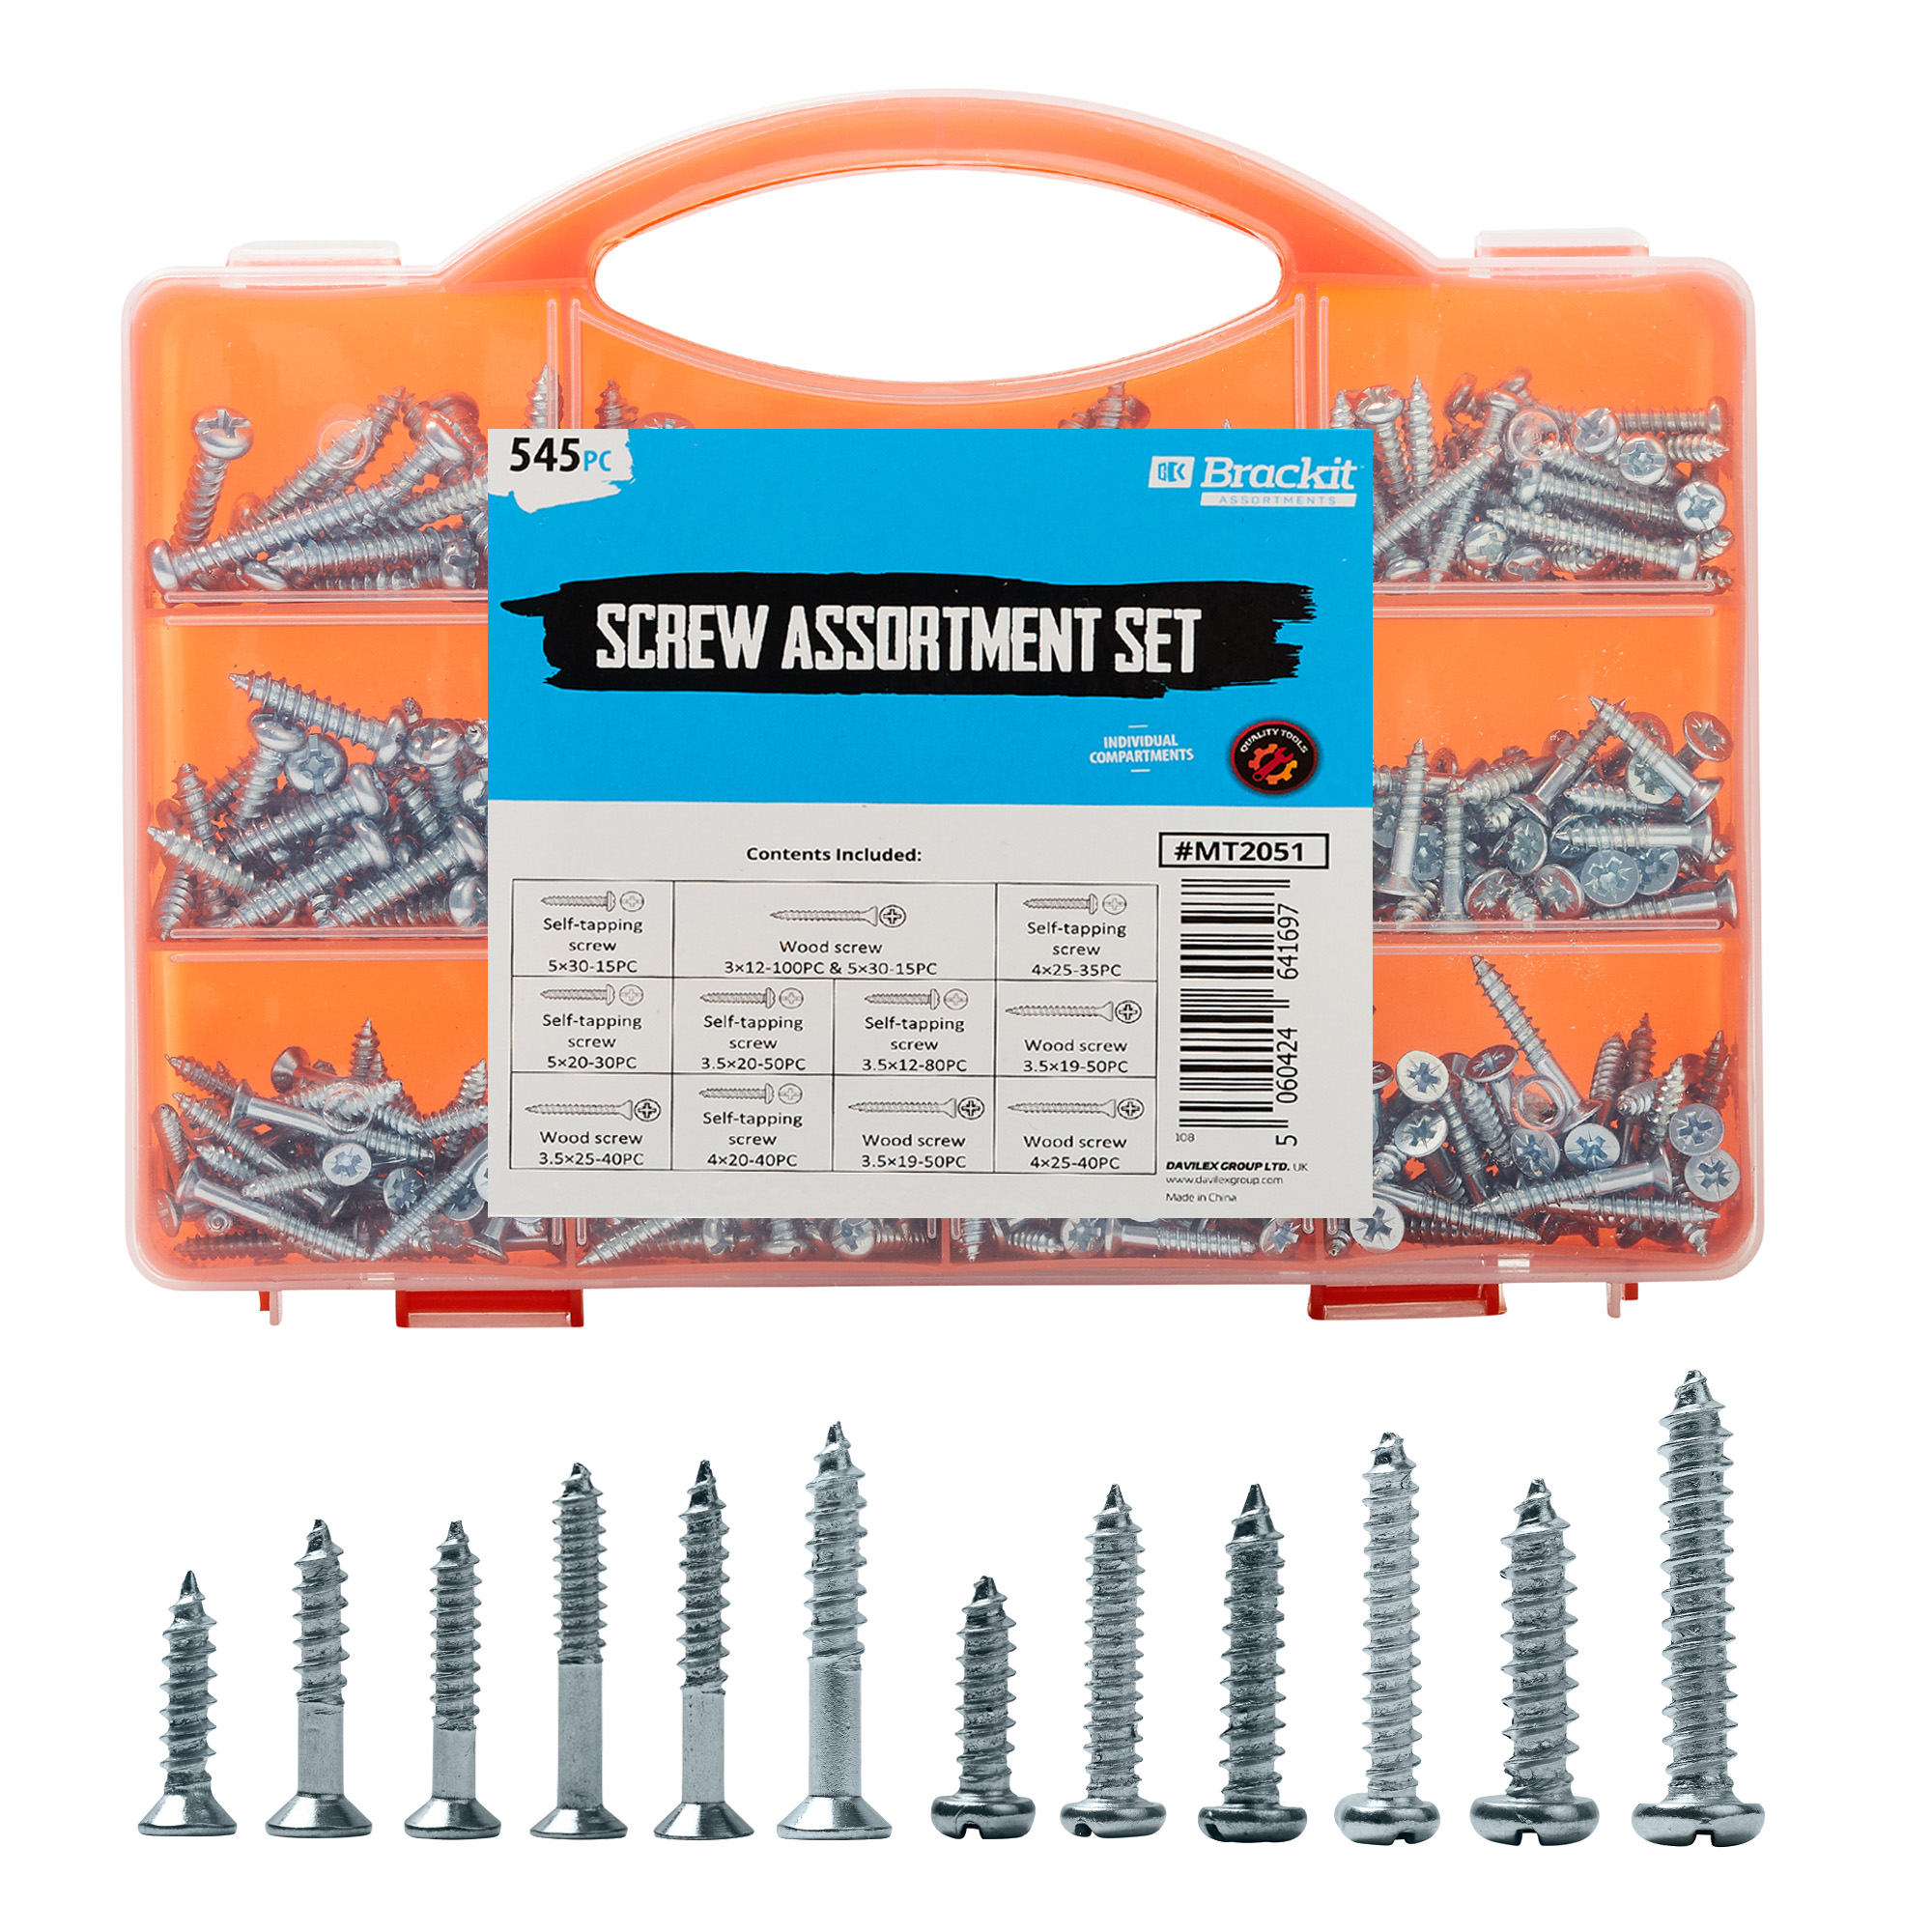 JOBLOT OF 10 SETS OF Brackit 545 Piece Self Tapping Screws Assortment Set – Secure Wood Screw Fastenings Kit – Assorted Sizes – For Repair, Main